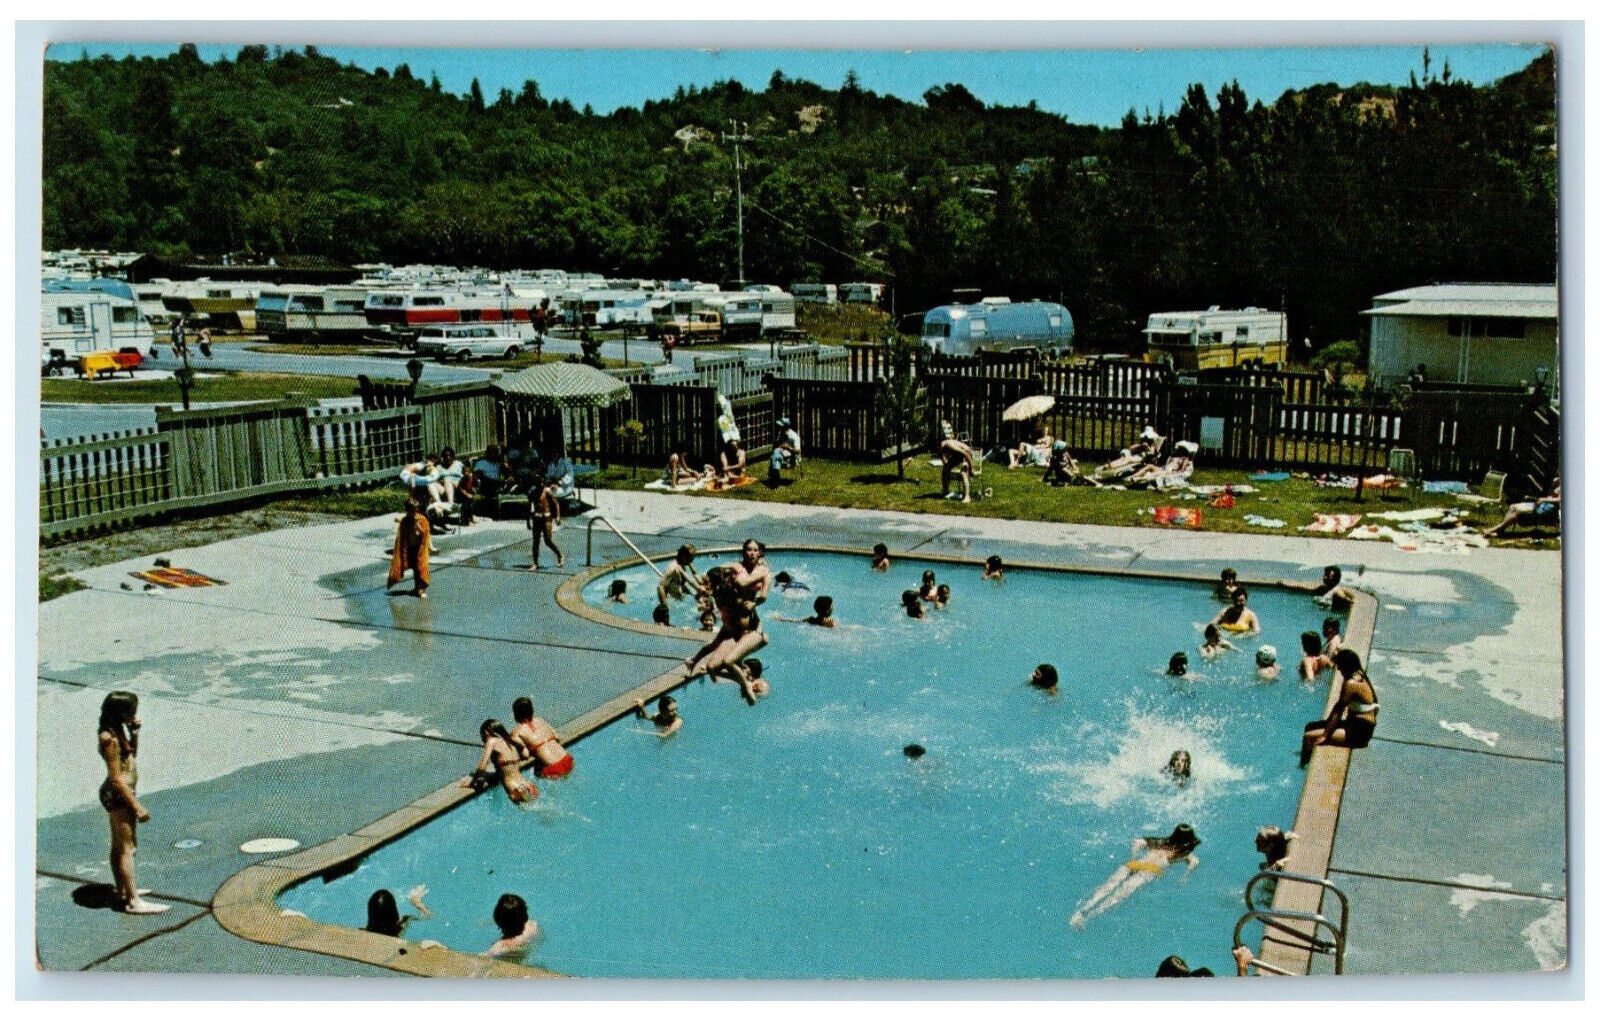 c1950's Pool Scene Gleaming Tile and Heated Water Scotts Valley CA Postcard